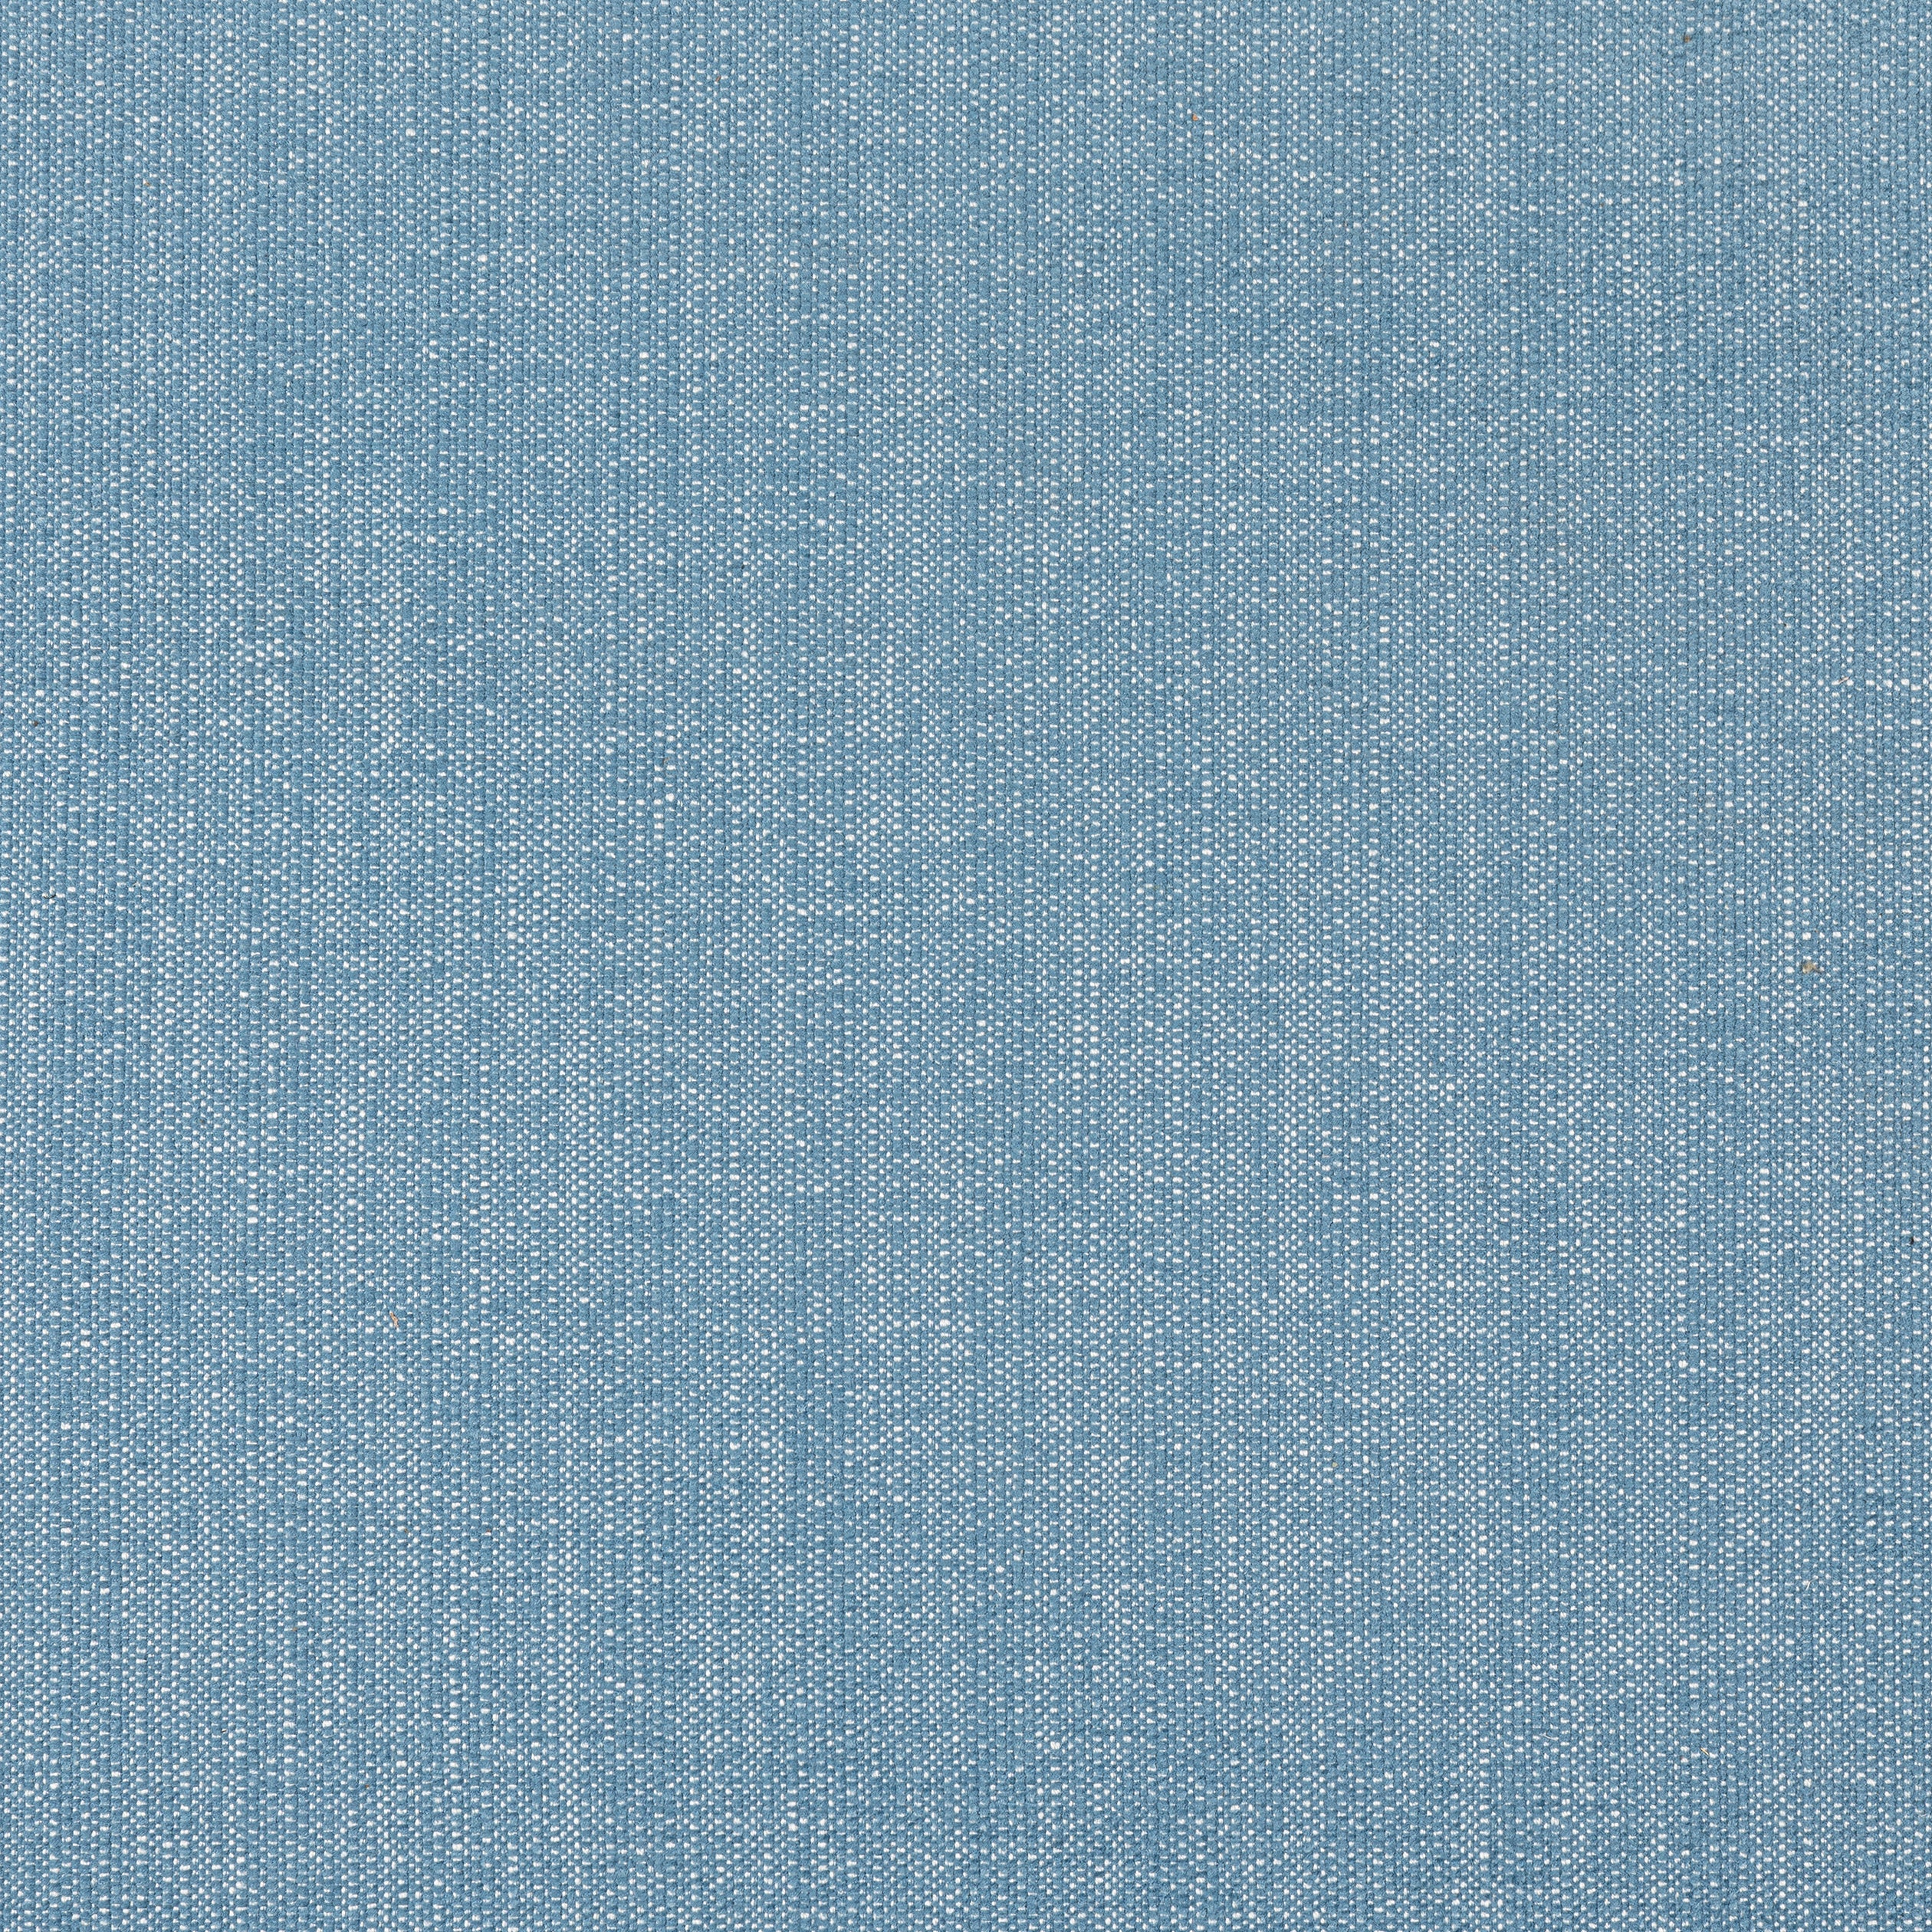 Veda fabric in ocean color - pattern number W8718 - by Thibaut in the Haven Textures collection